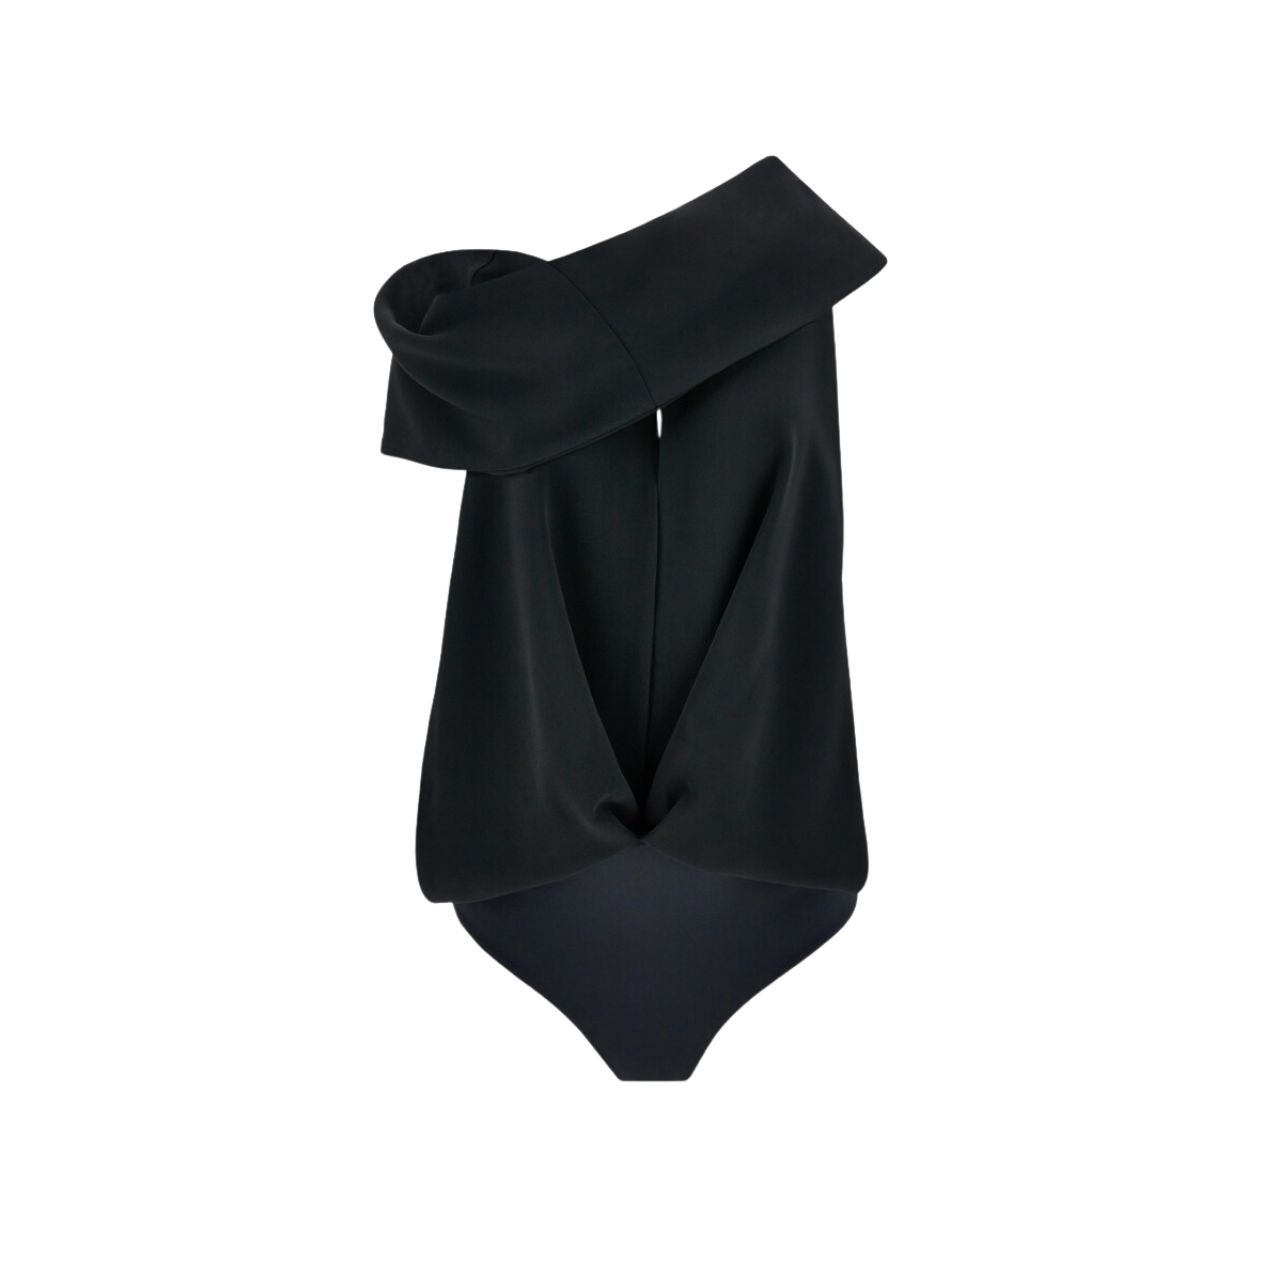 Black bodysuit with draping and side slits